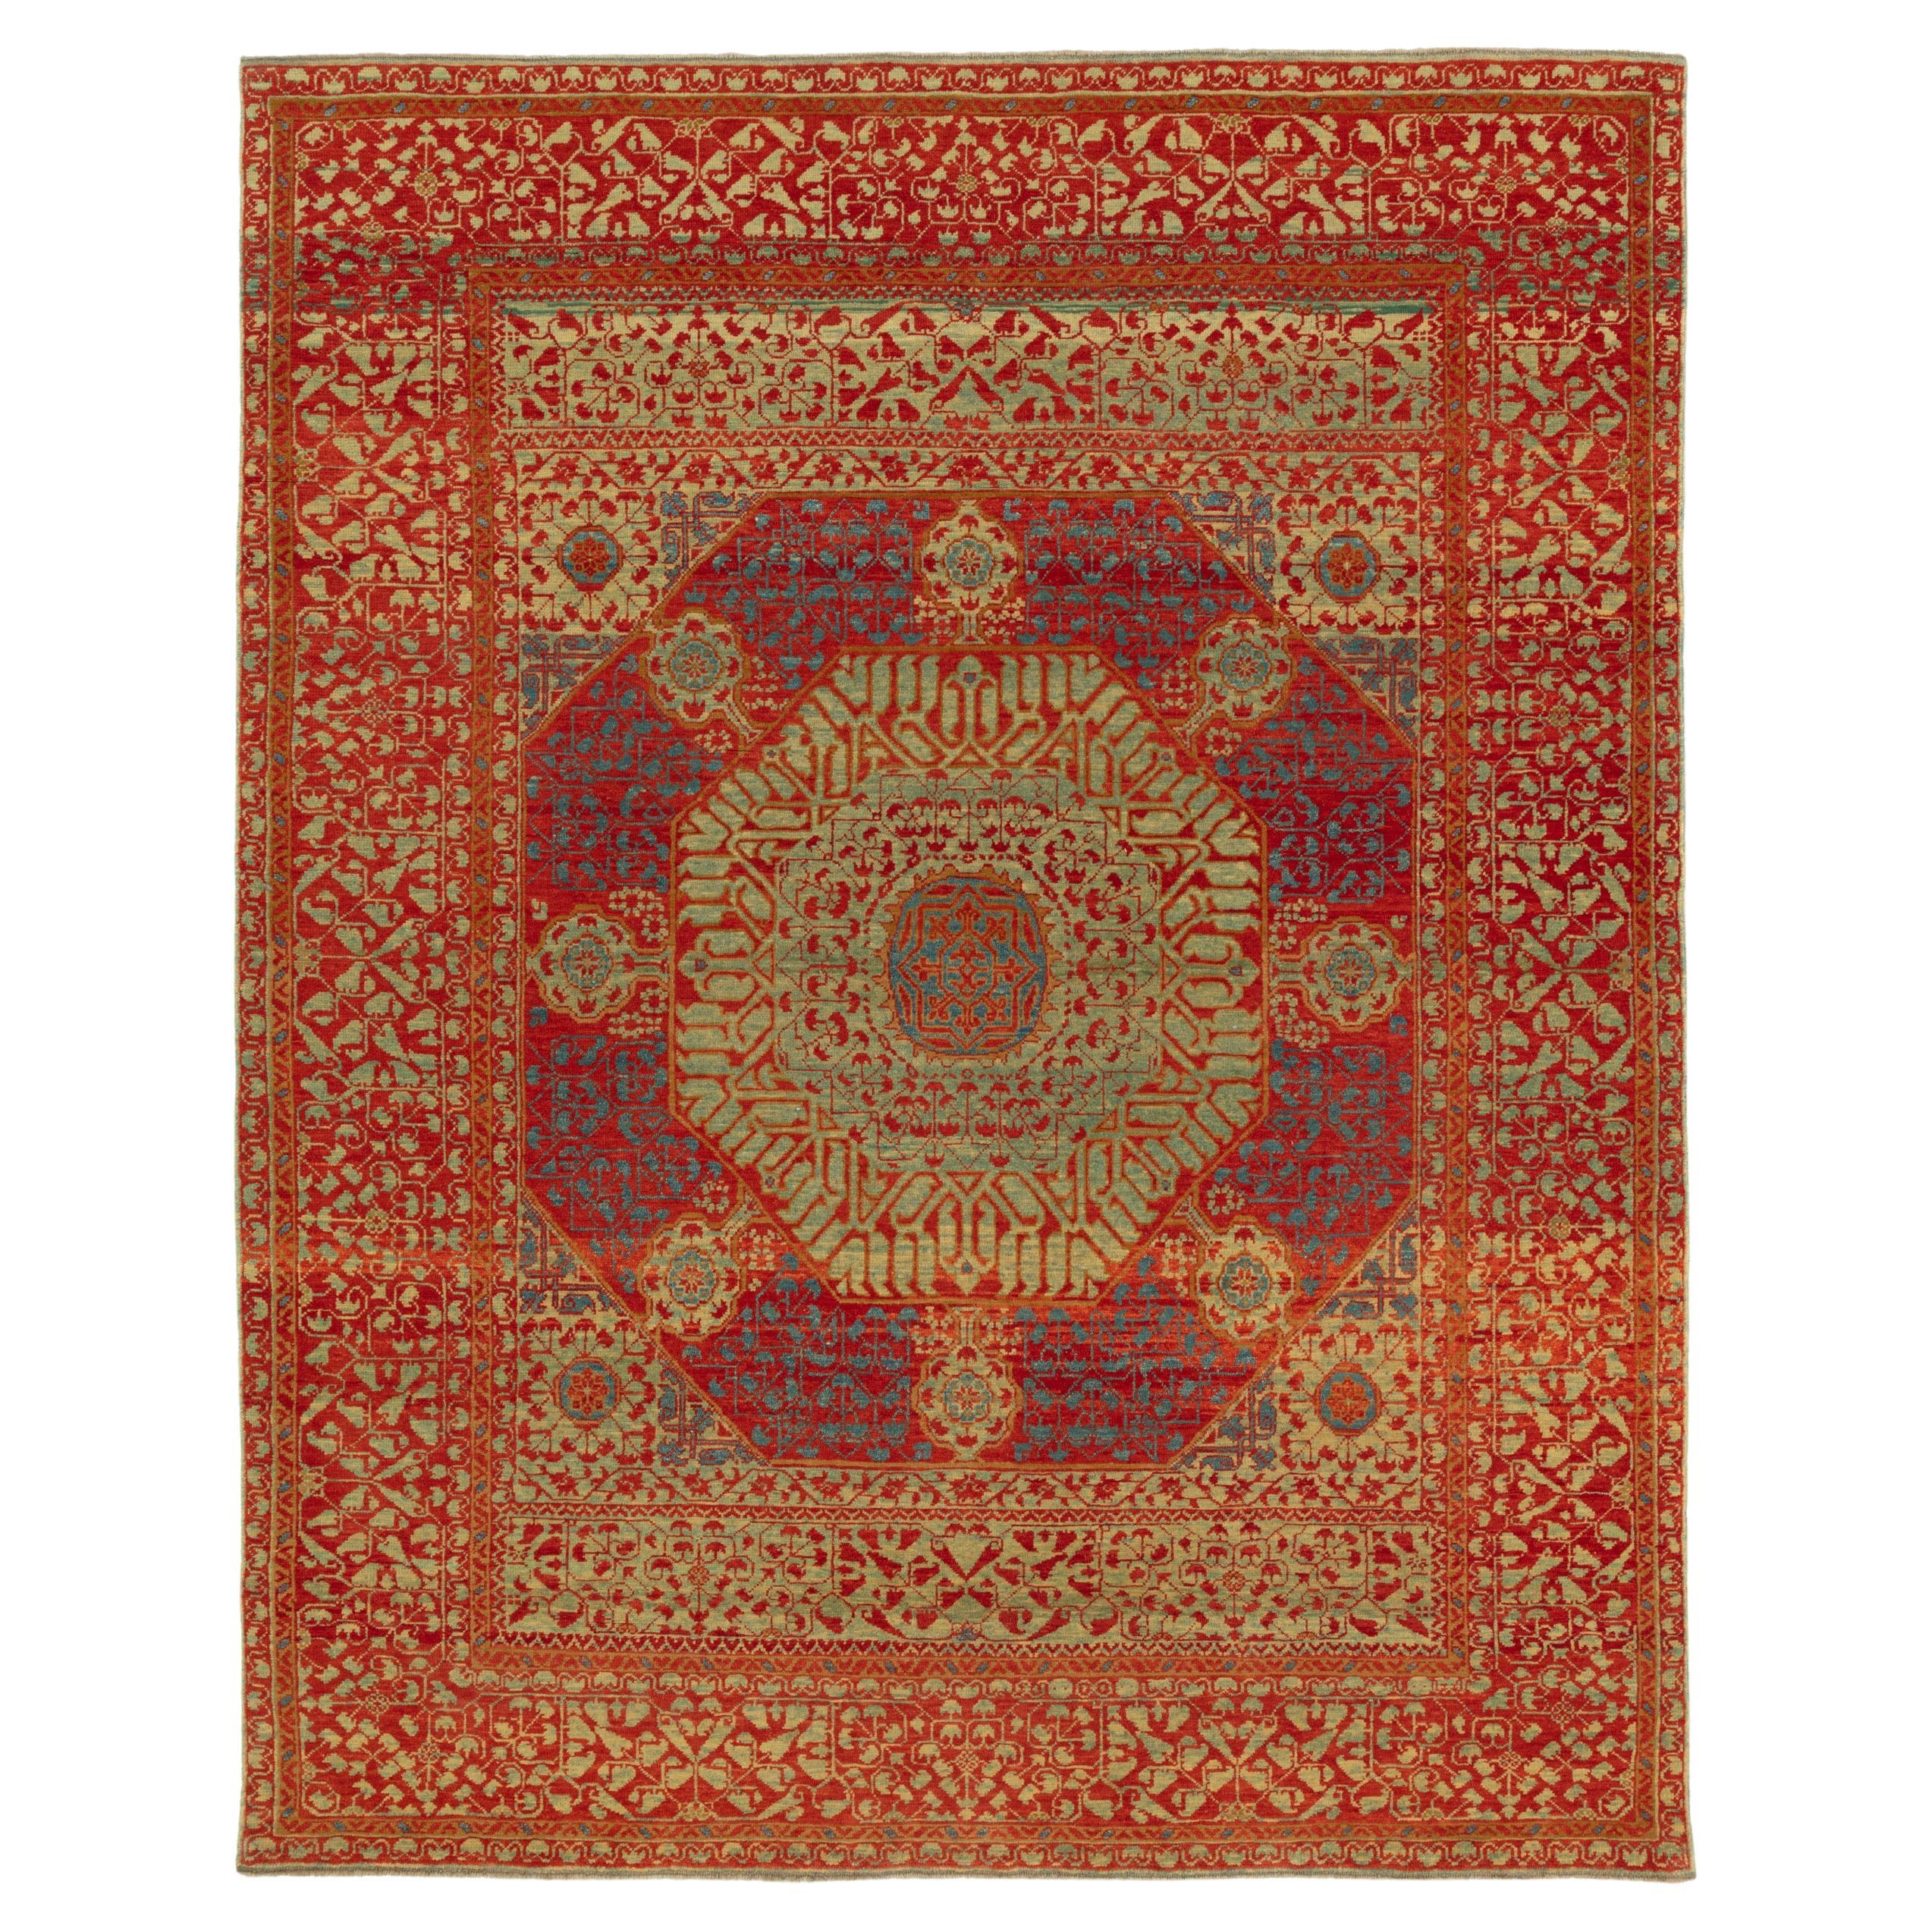 Ararat Rugs Mamluk Rug with Large Octagon 16th Cen. Antique Egypt Revival Carpet For Sale